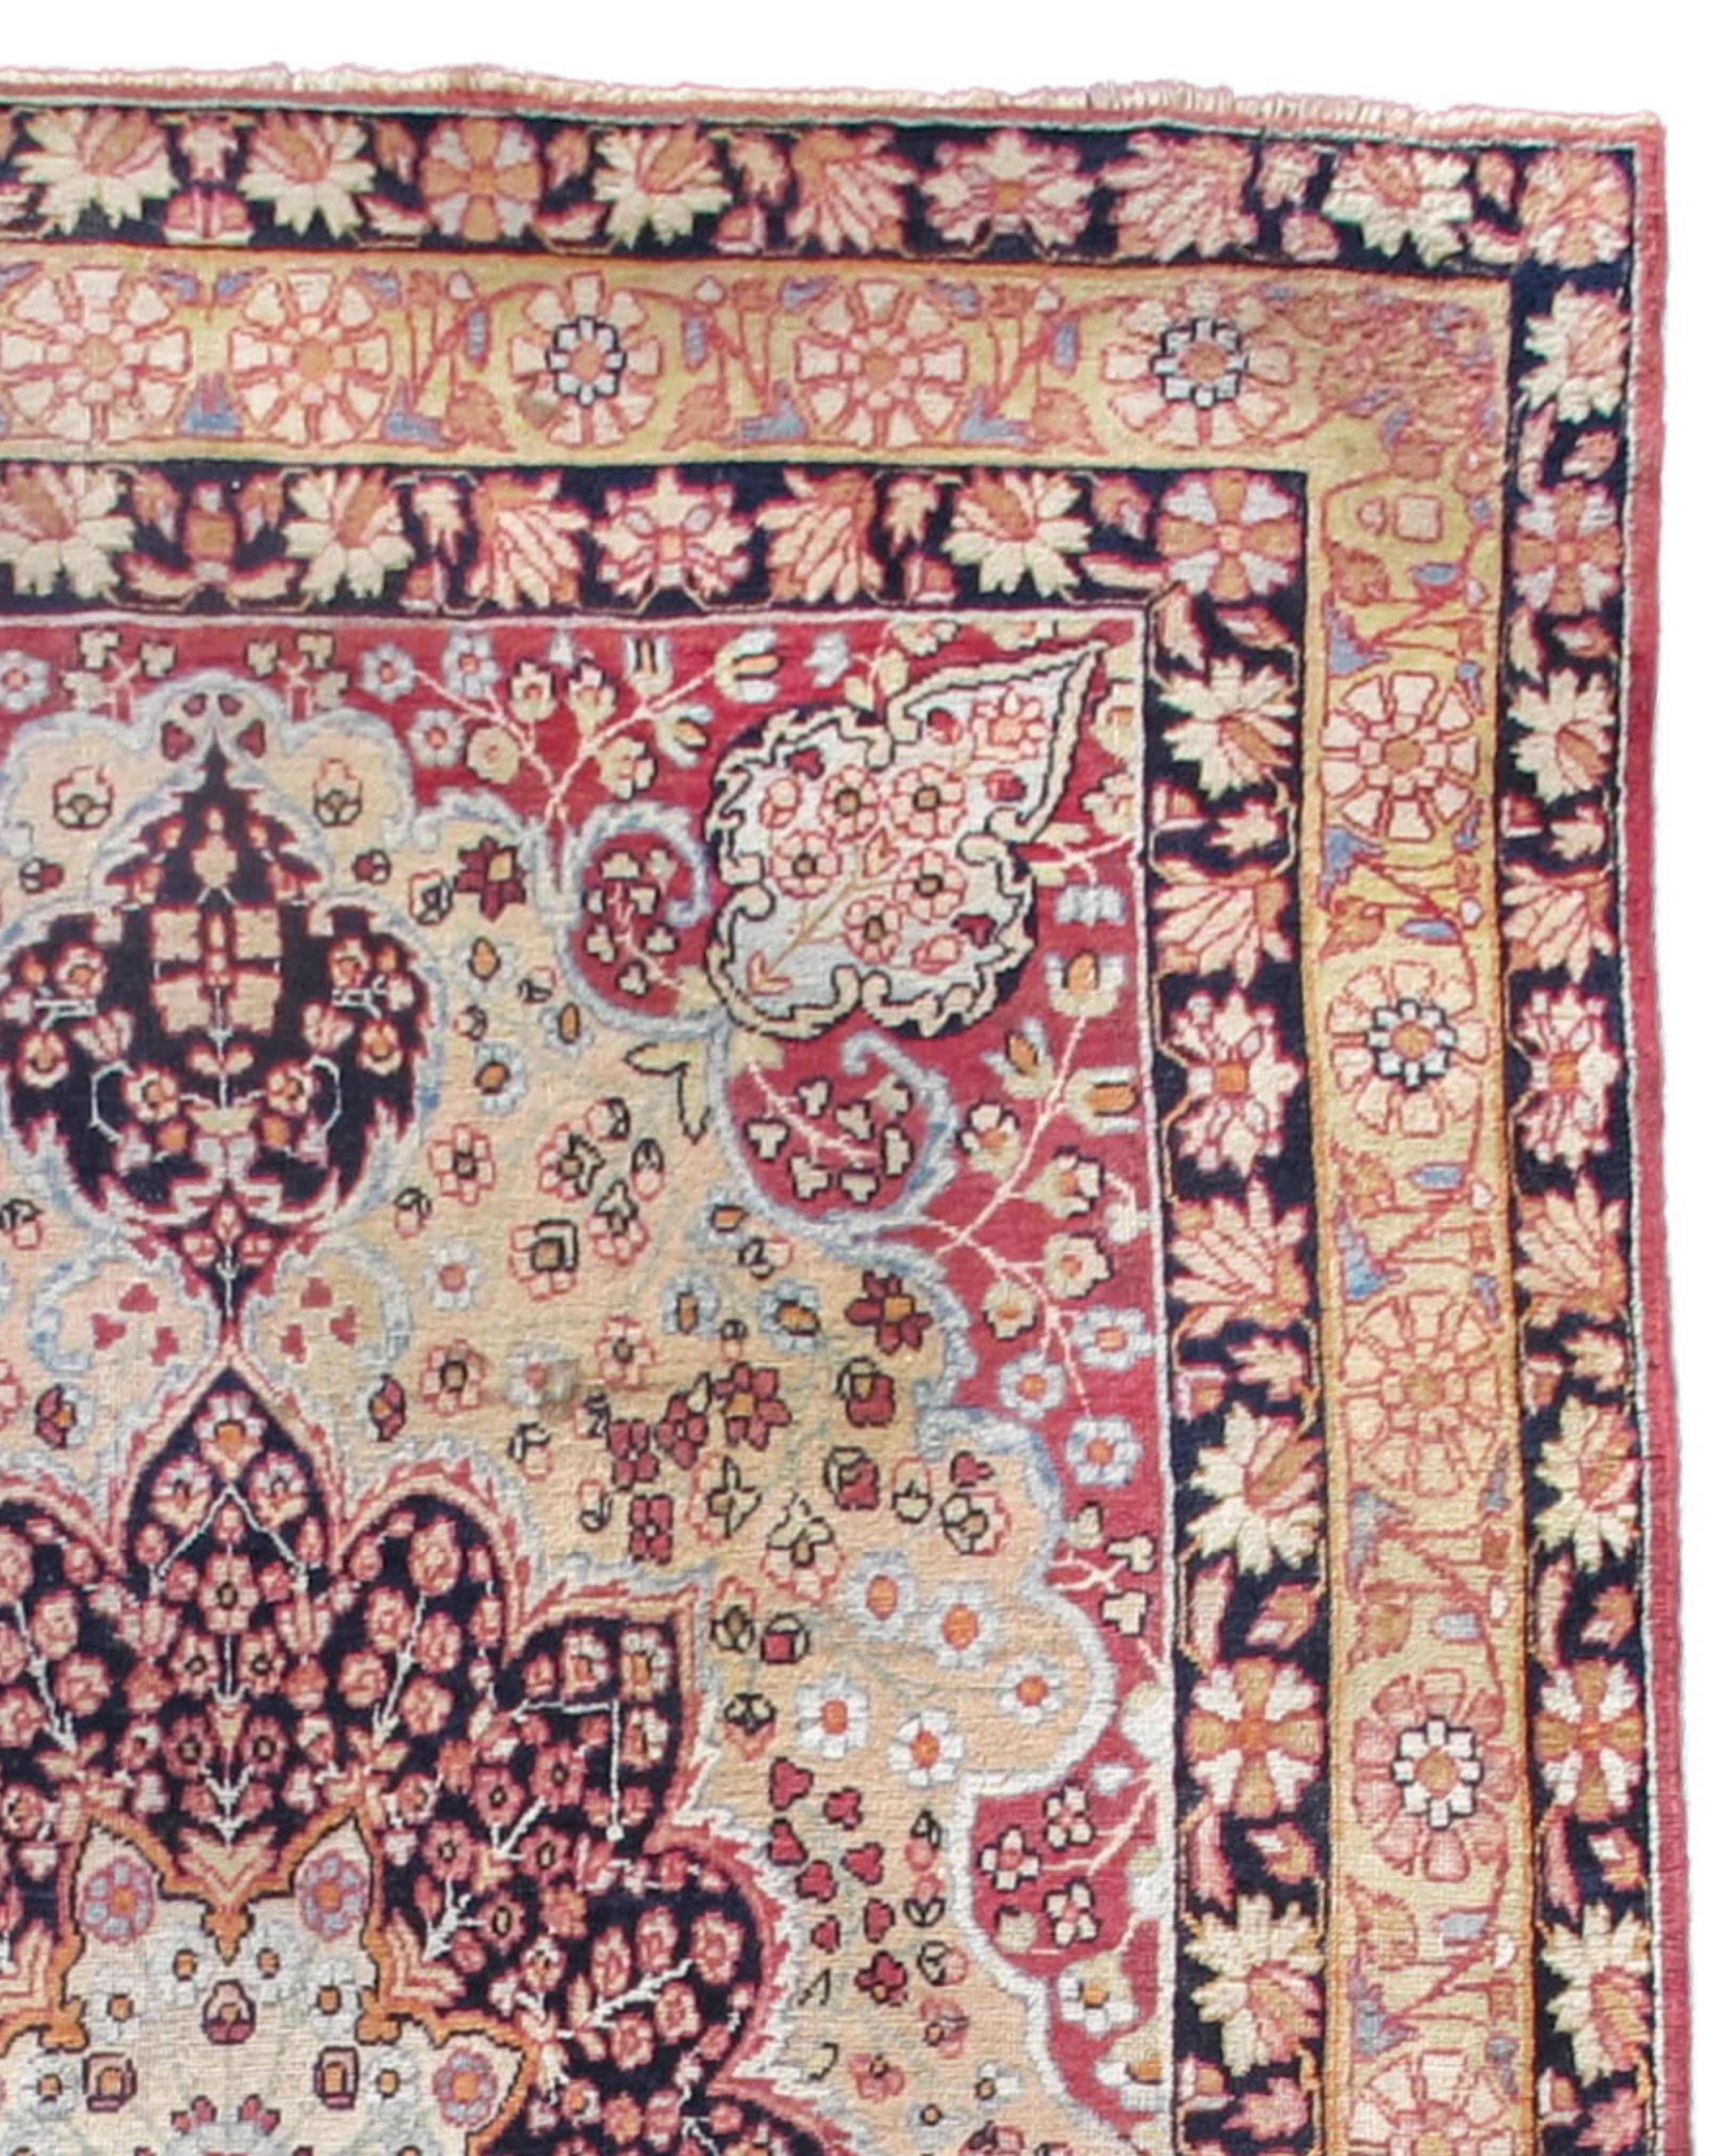 Kirman Rug, Late 19th Century

Additional information:
Dimensions: 4'6